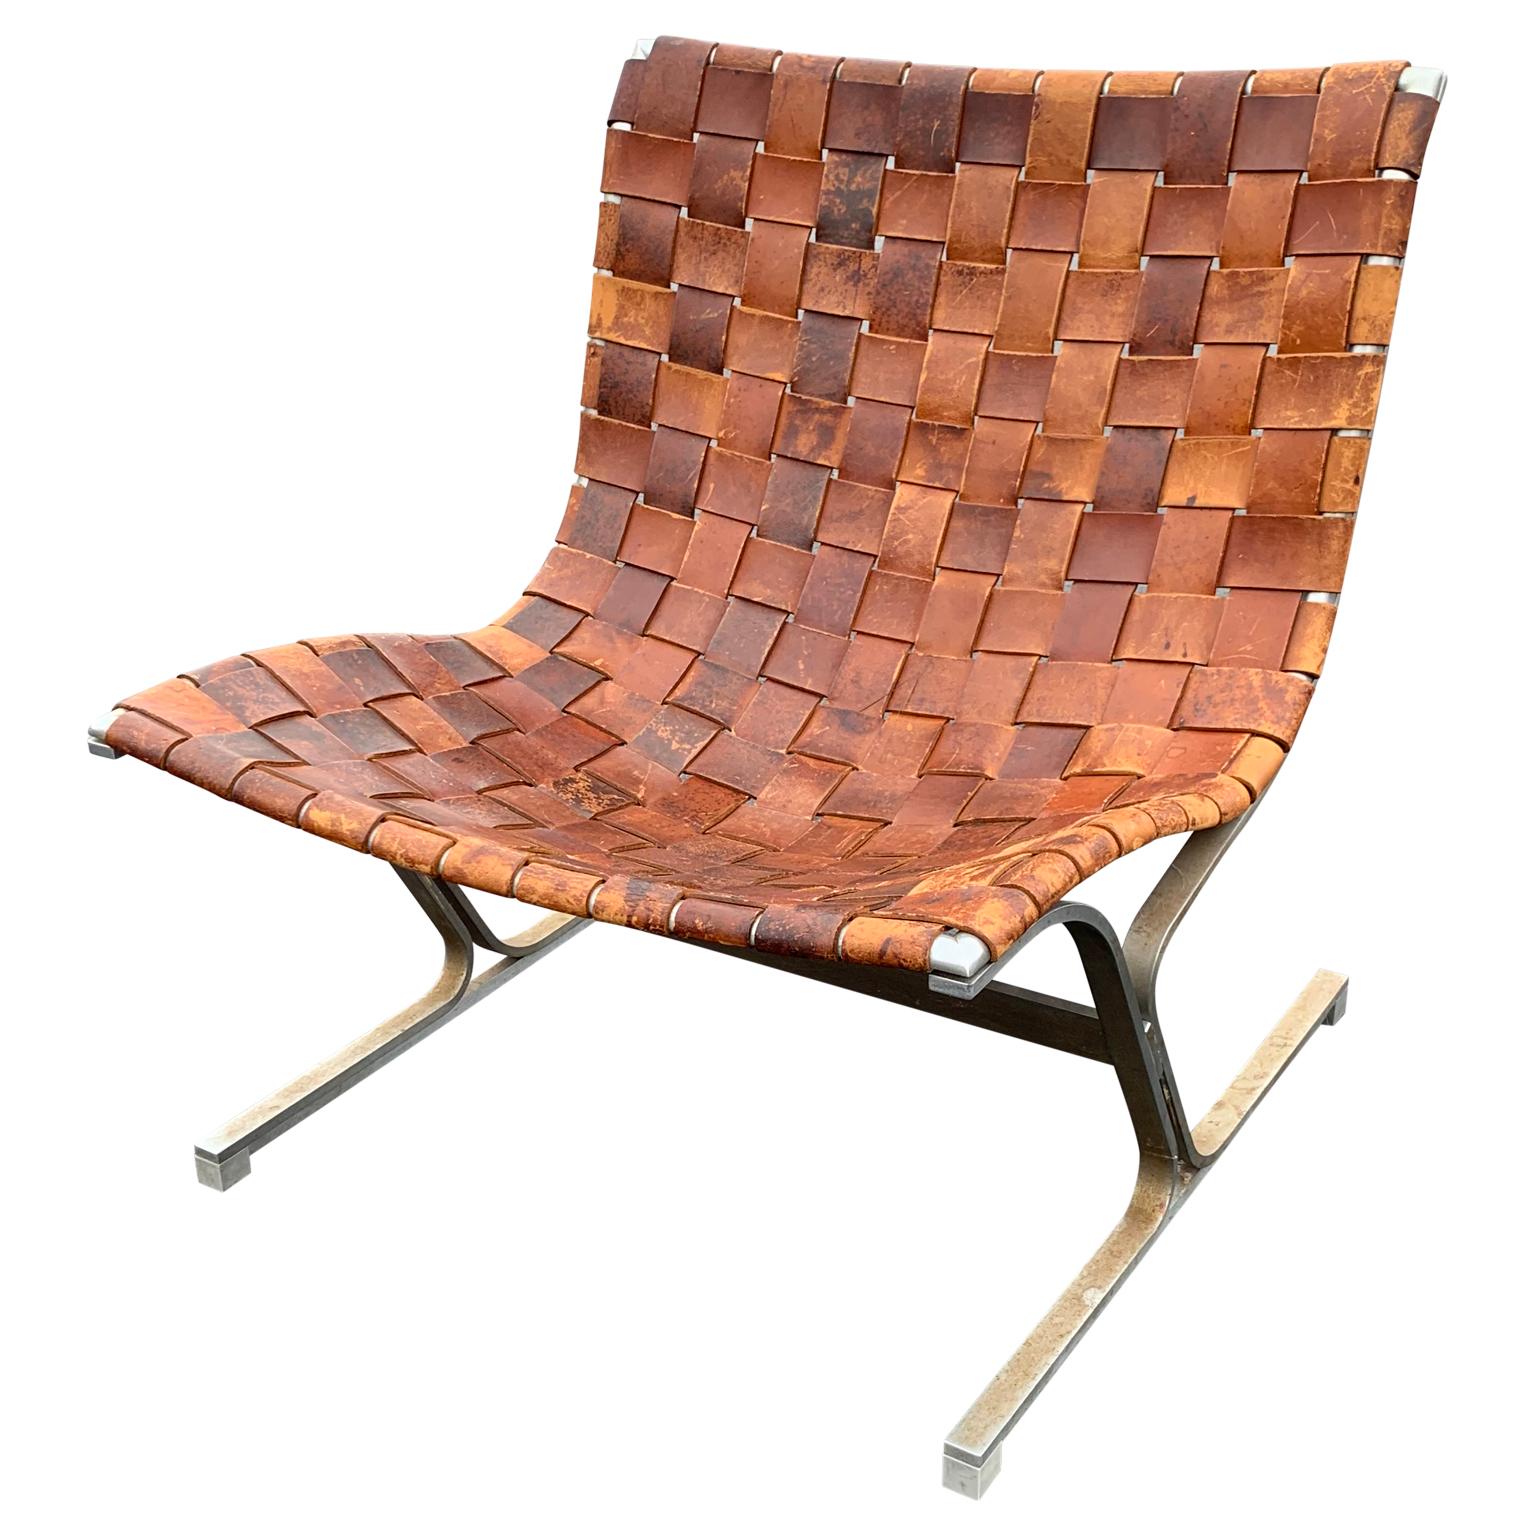 Mid-Century Modern cognac-colored leather lounge chair by Ross Littell

PLR 1 woven leather chair with amazing vintage cognac colored patina and brushed steel for ICF, Milan. Made in Italy, circa 1965.
Optional 8-12 hour Tri-State & DC snap